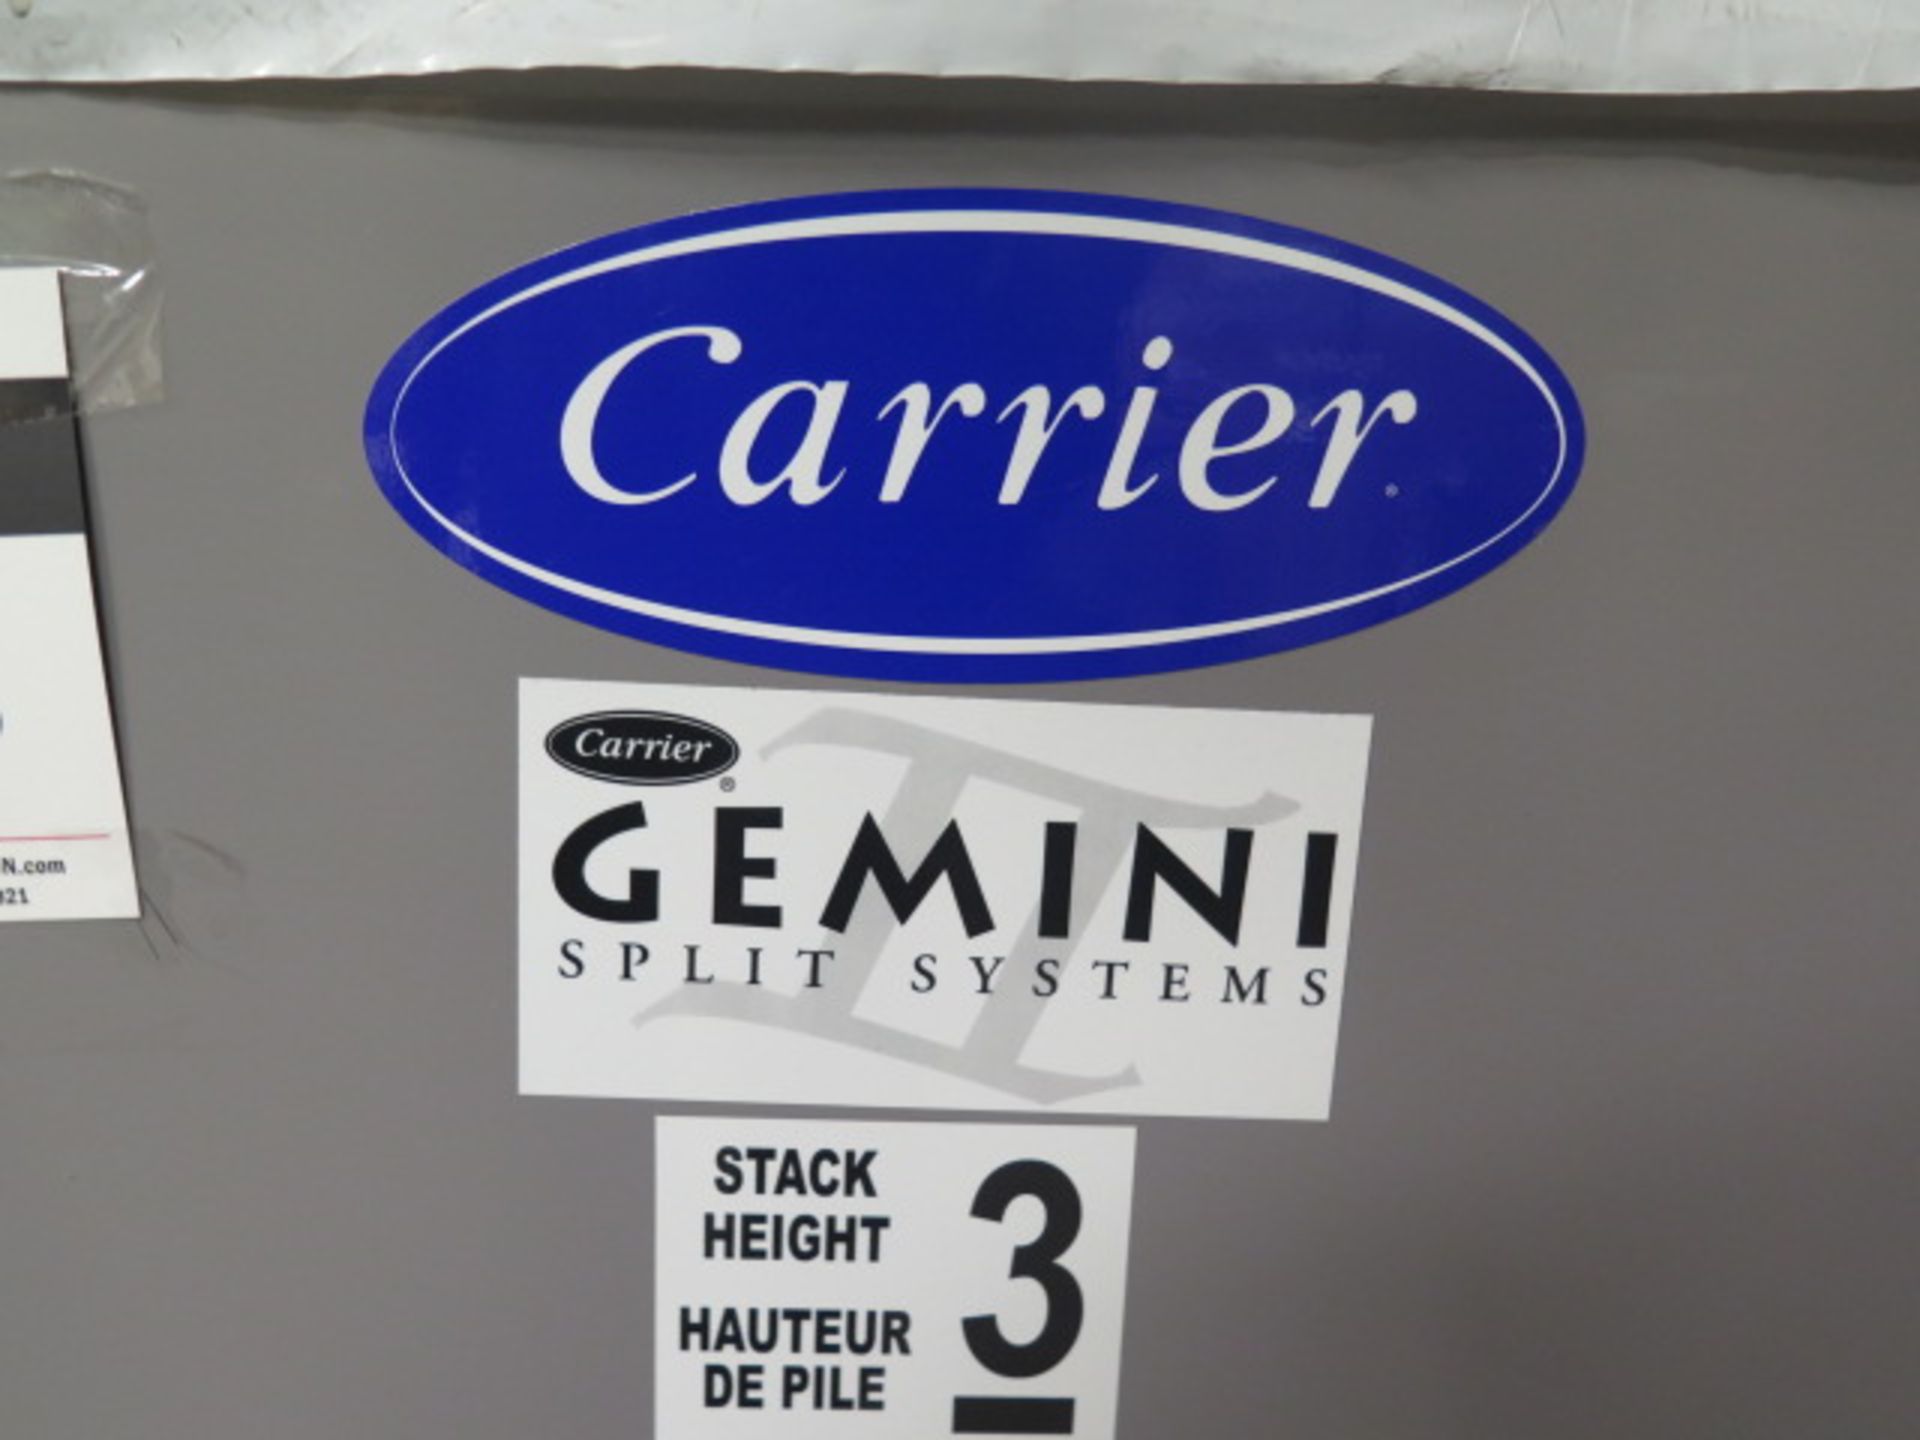 Carrier “Gemini Split Systems” 38AUQA07A0A6-0A0A0 6 Ton Dual Voltage Heat Pump Air Conditioners, - Image 4 of 7